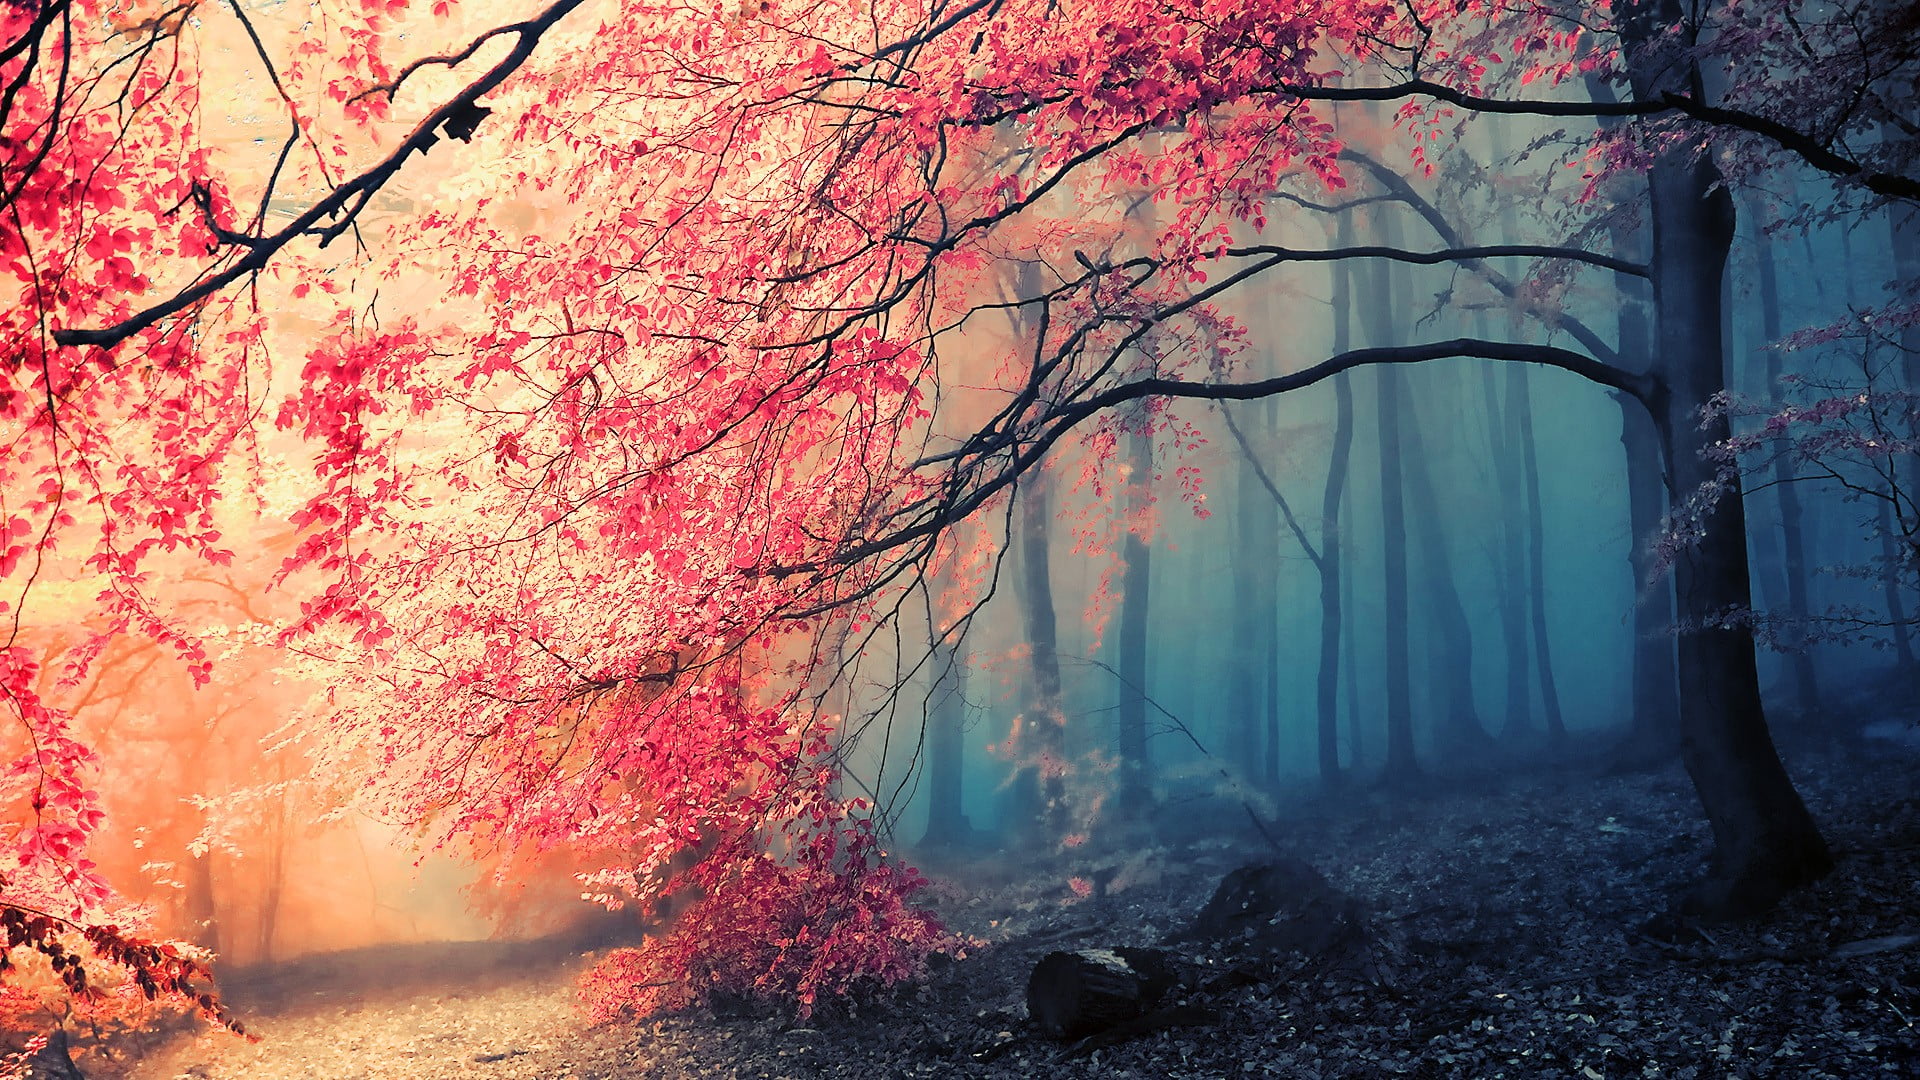 pink flowering tree, landscape photo of forest, nature, trees